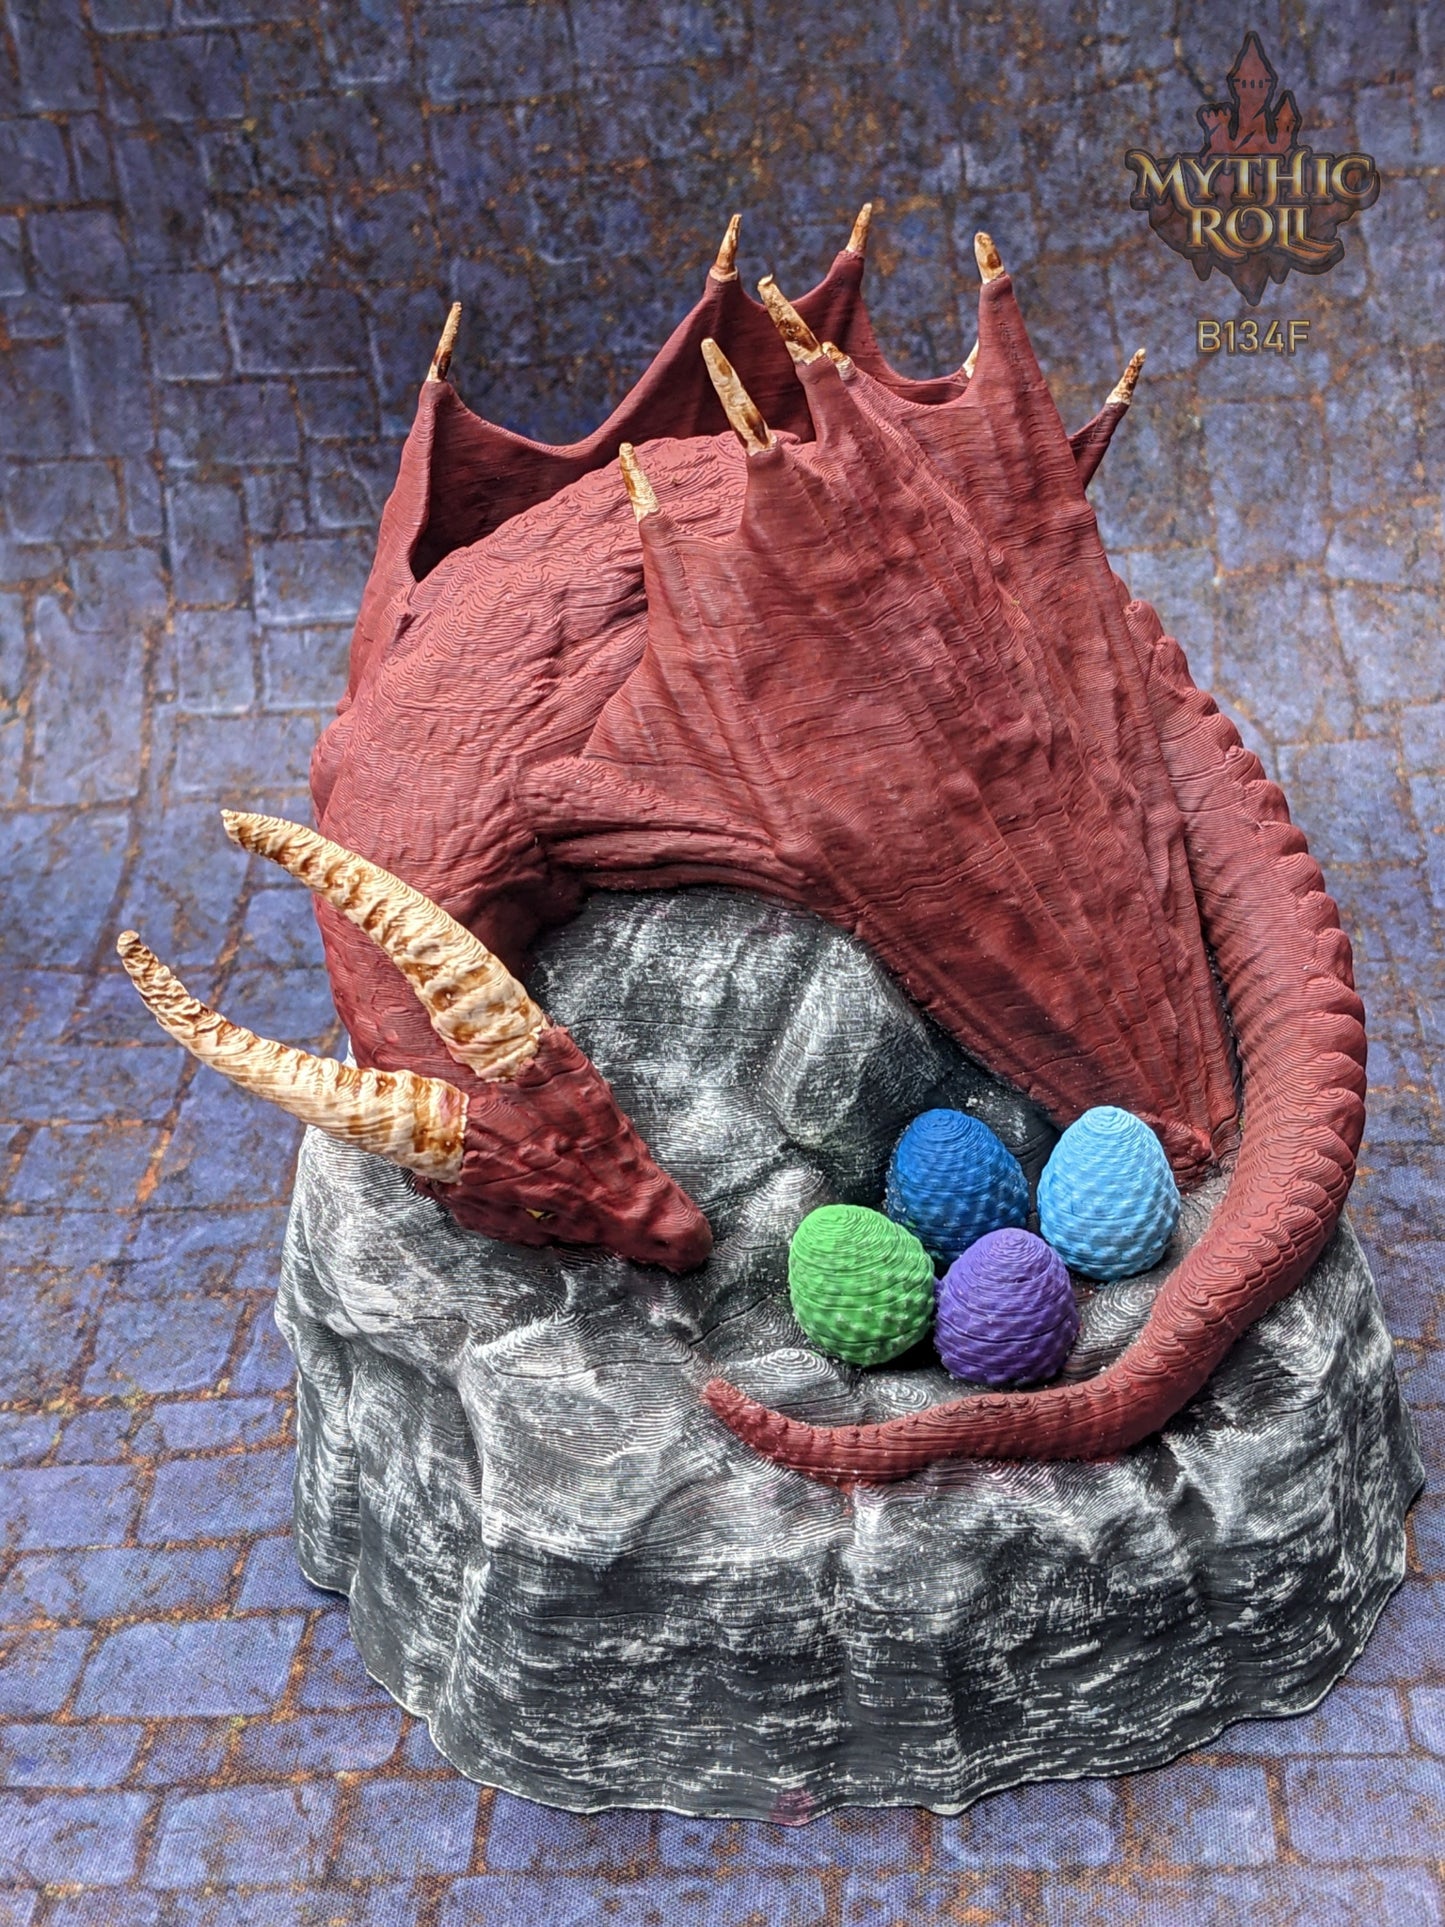 Dragon's Egg Nest 3D Printed Dice Jail - Unchained Games - Mythic Roll Collection - Guard Your Dice in Style